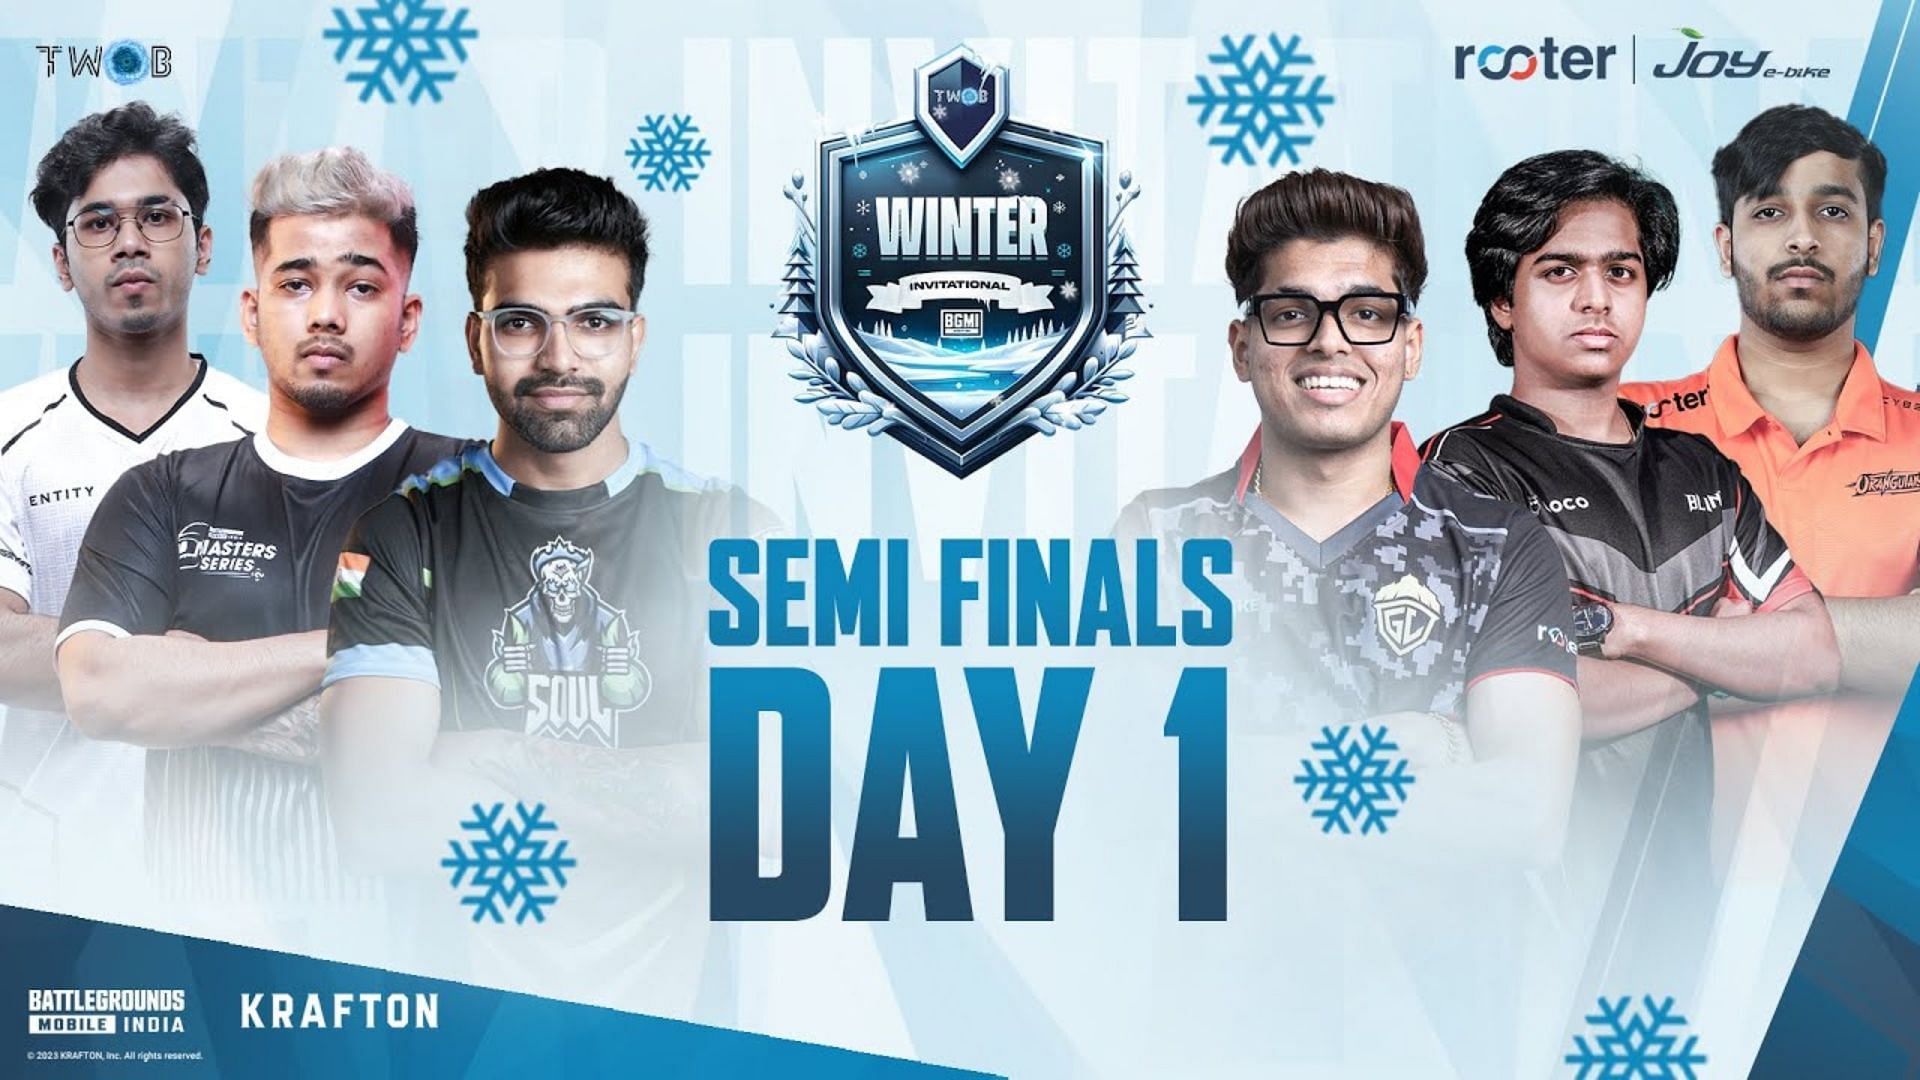 Day 1 of TWOB Invitational Semifinals was held on December 22 (Image via TWOB)